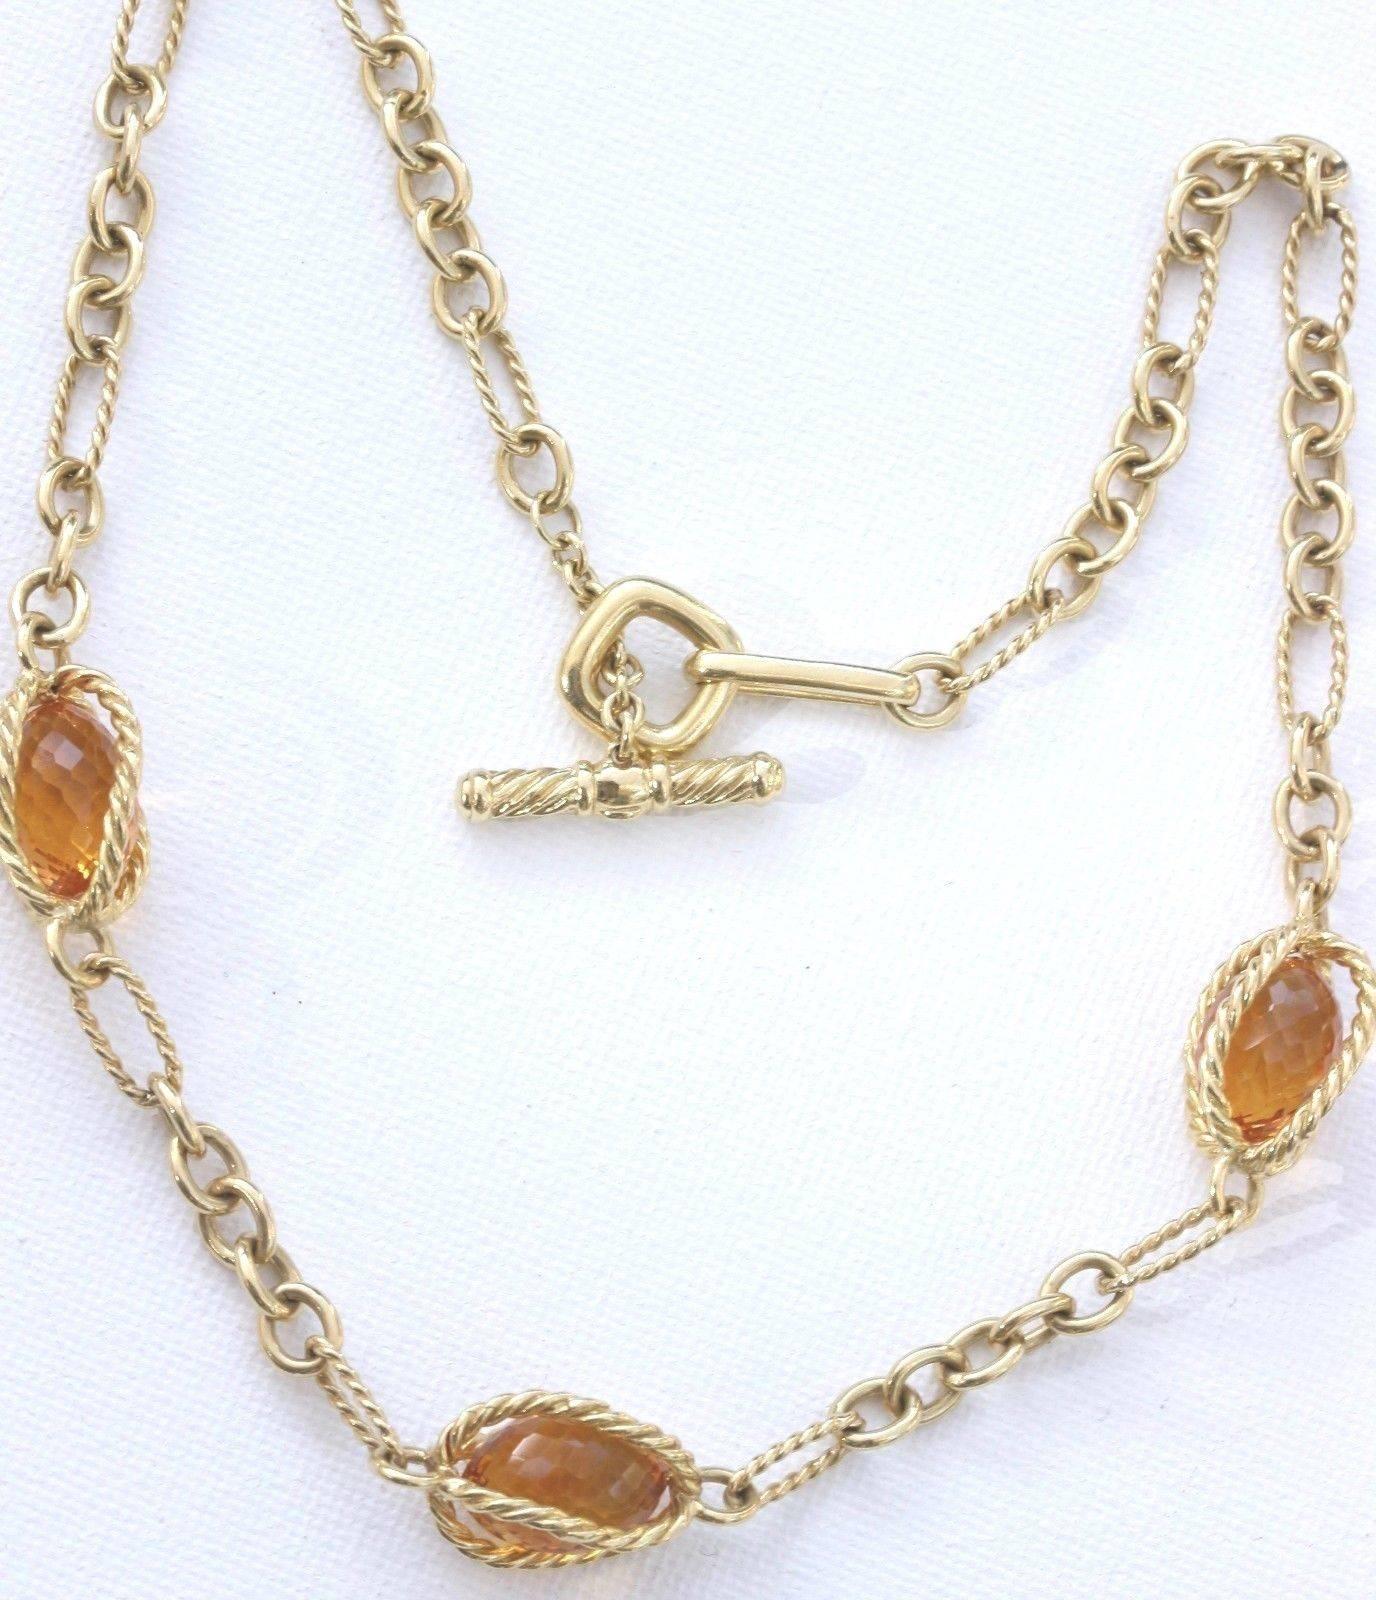 David Yurman 
Style:  Citrine Briolettes Gold Toggle Necklace
Metal:  18K Yellow Gold
Grams:  35 grams
Width:  12.5 MM at widest points
Hallmark: DY 750
Includes:  Elegant Necklace Box

Retail Value:  $5,850 + tax= $6,303.37